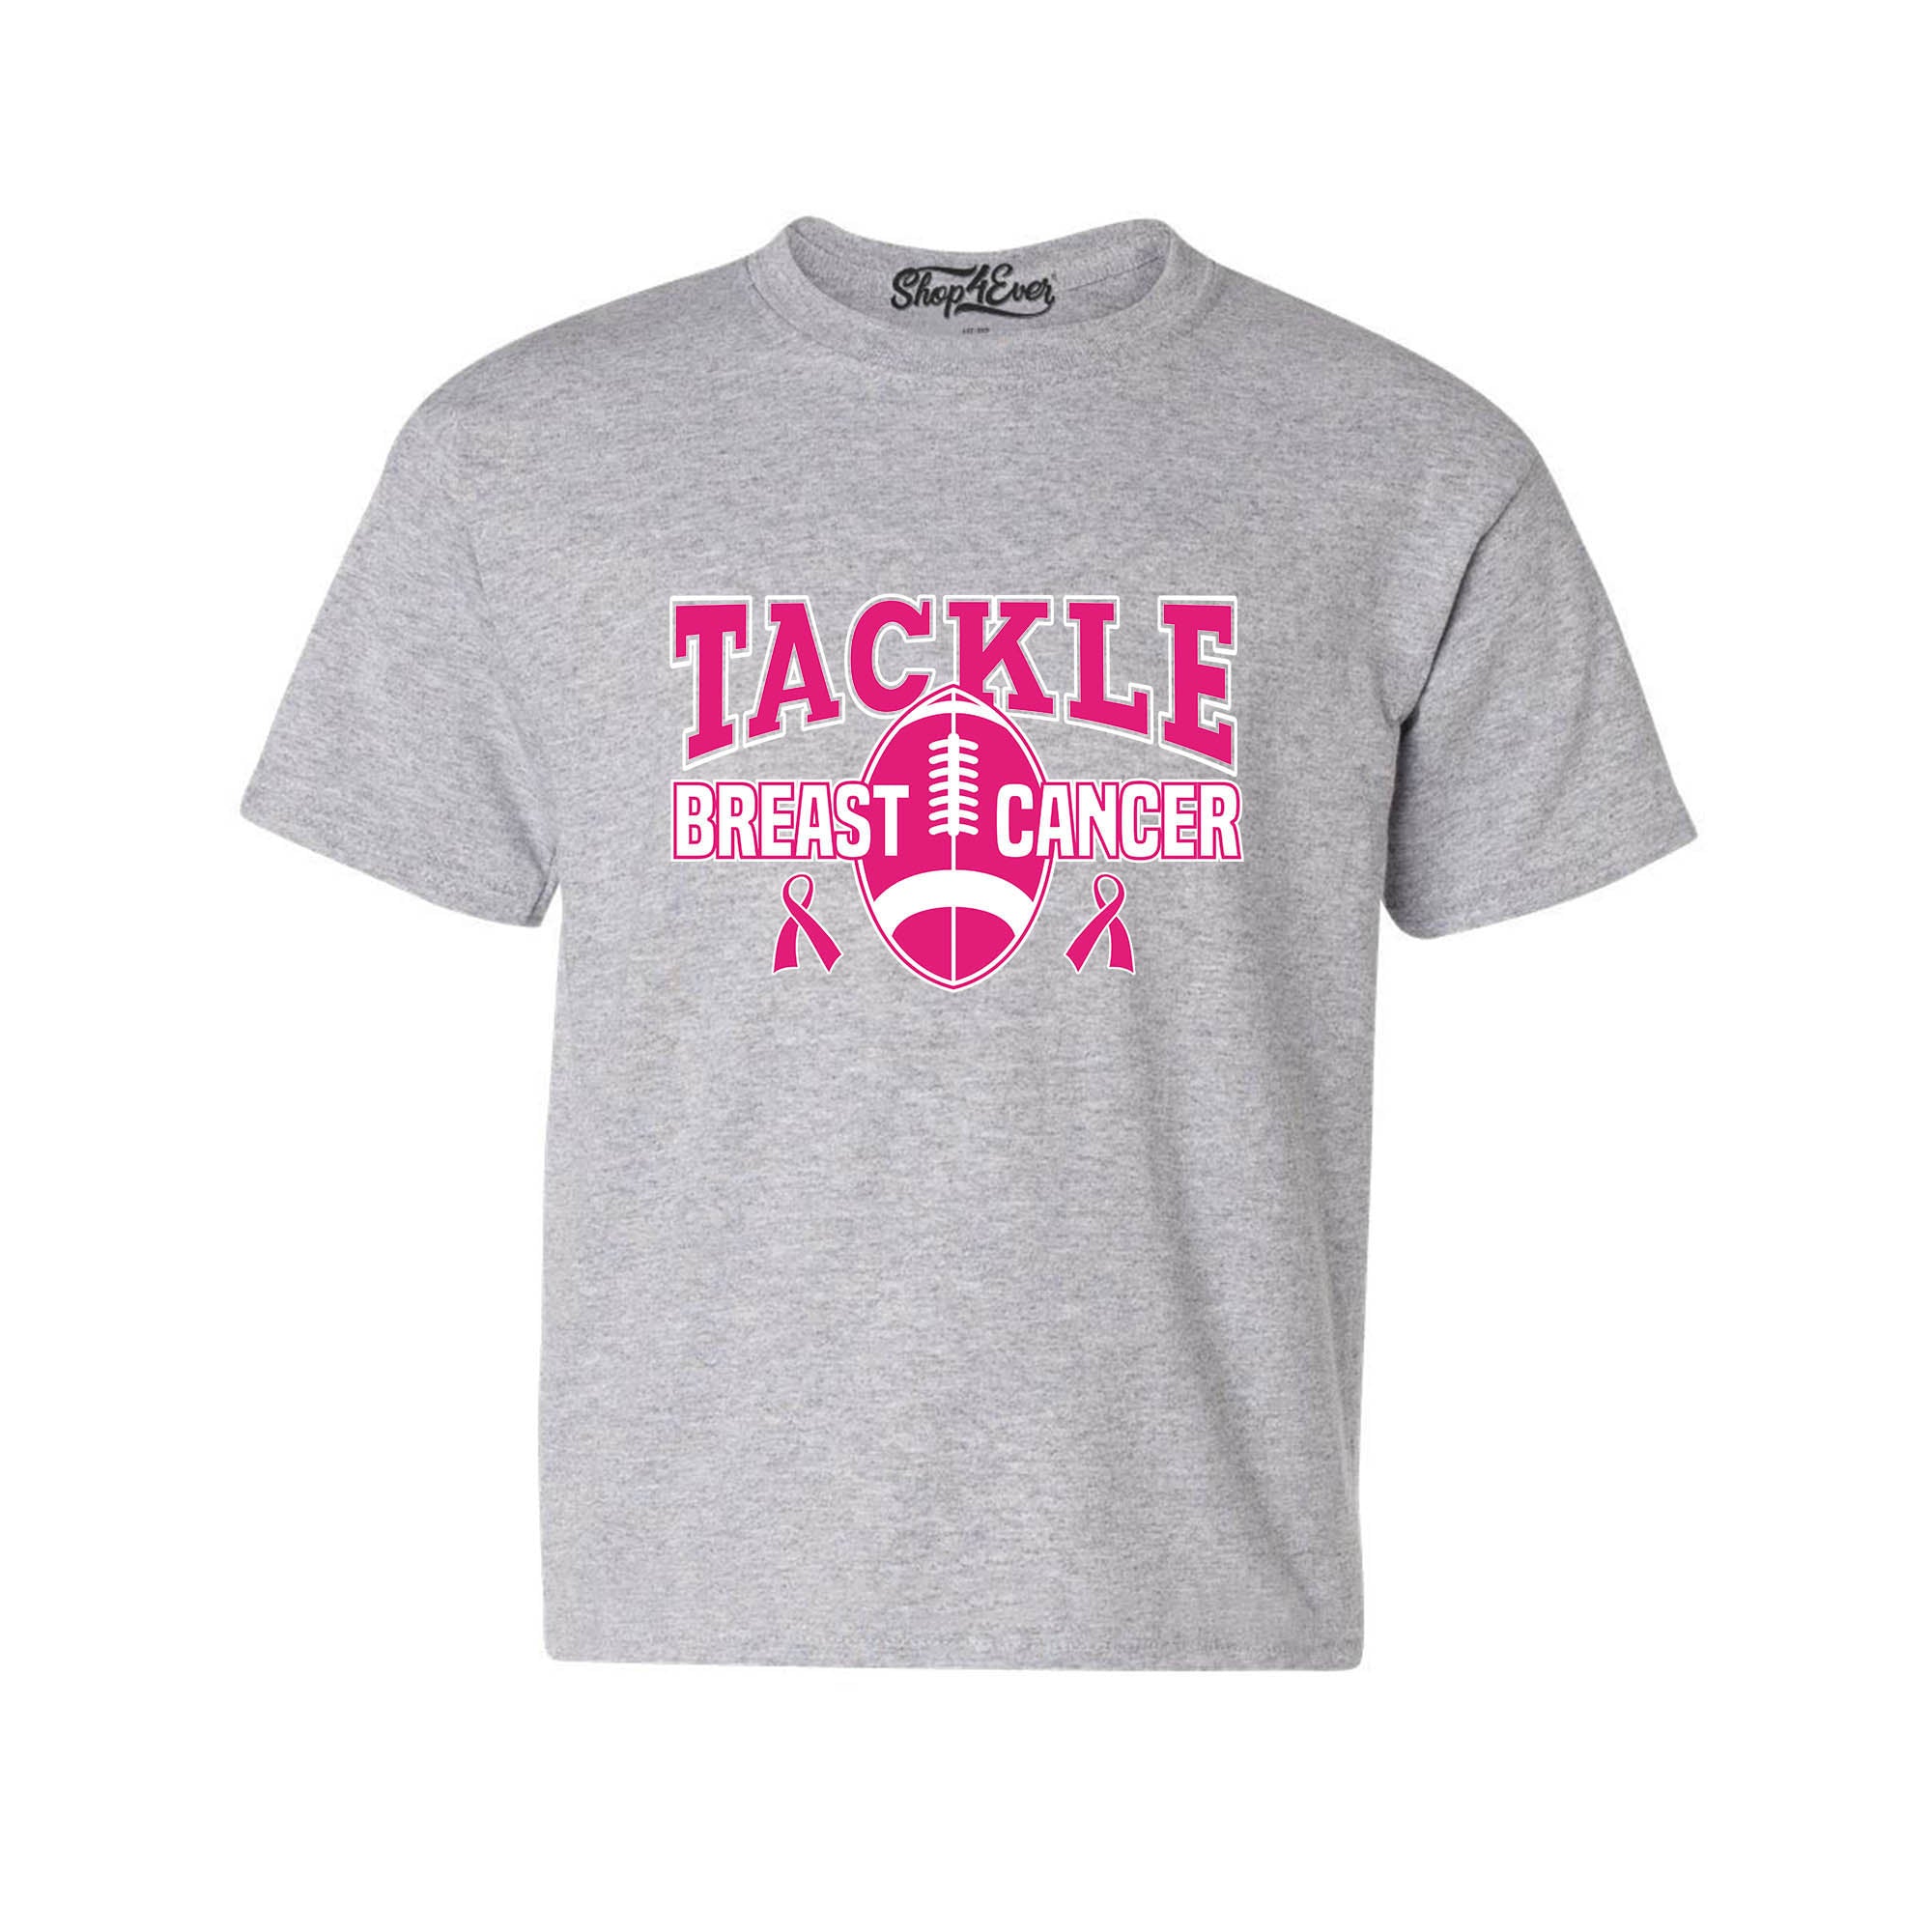 Tackle Breast Cancer Awareness Youth's T-Shirt Support Child's Tee